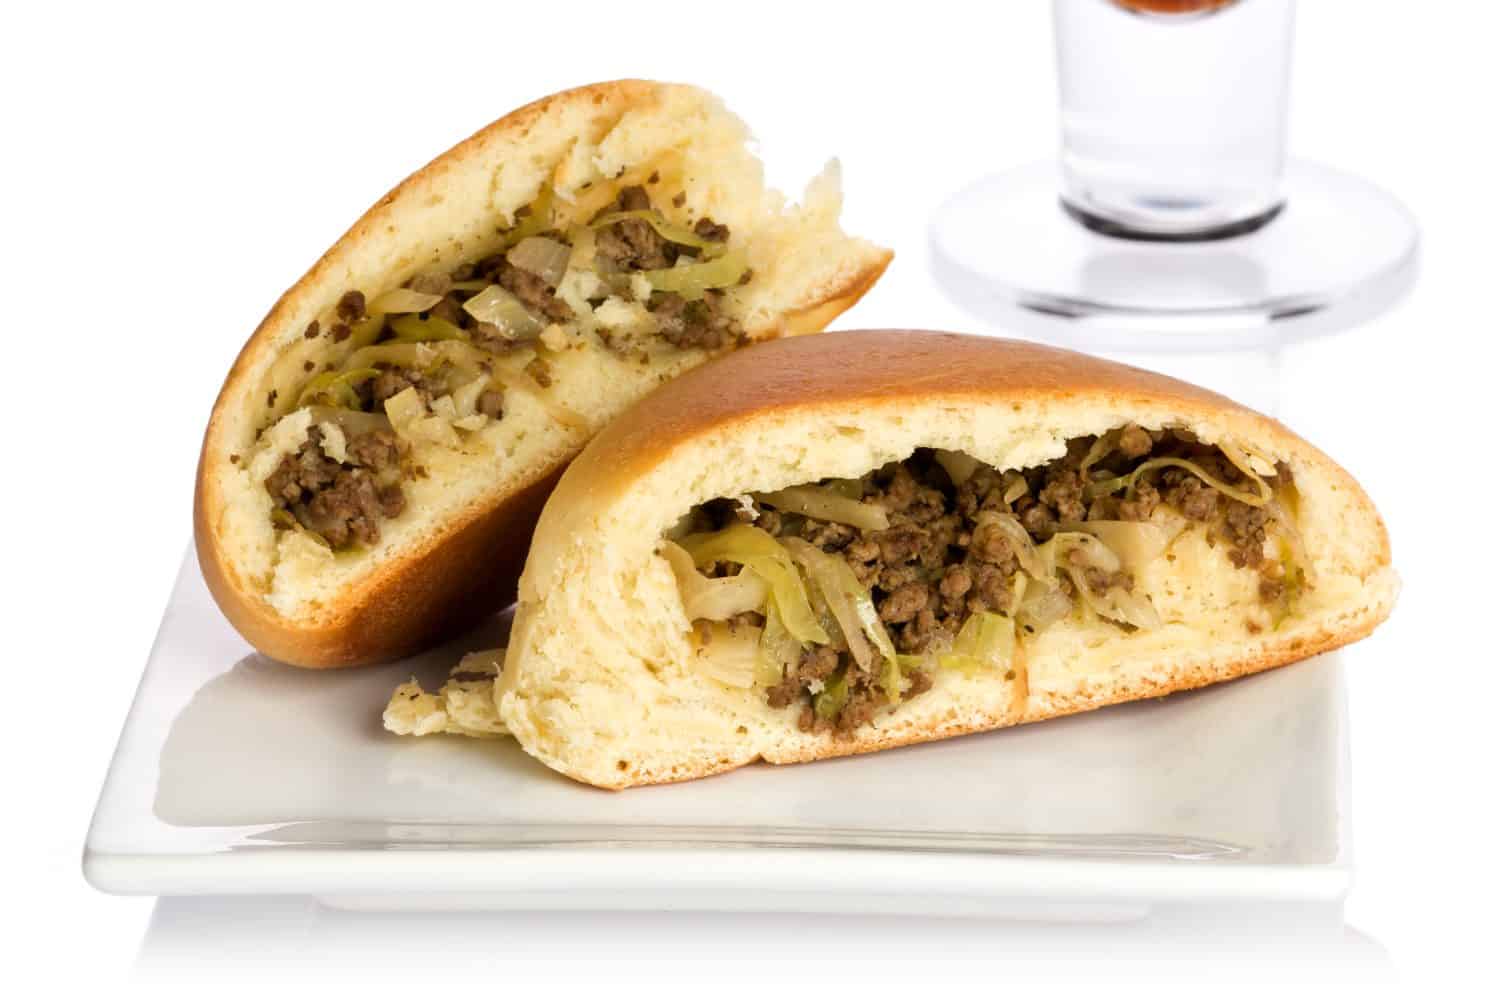 Single sliced bierock with seasoned ground beef, cabbage, and onion filling on a small plate.